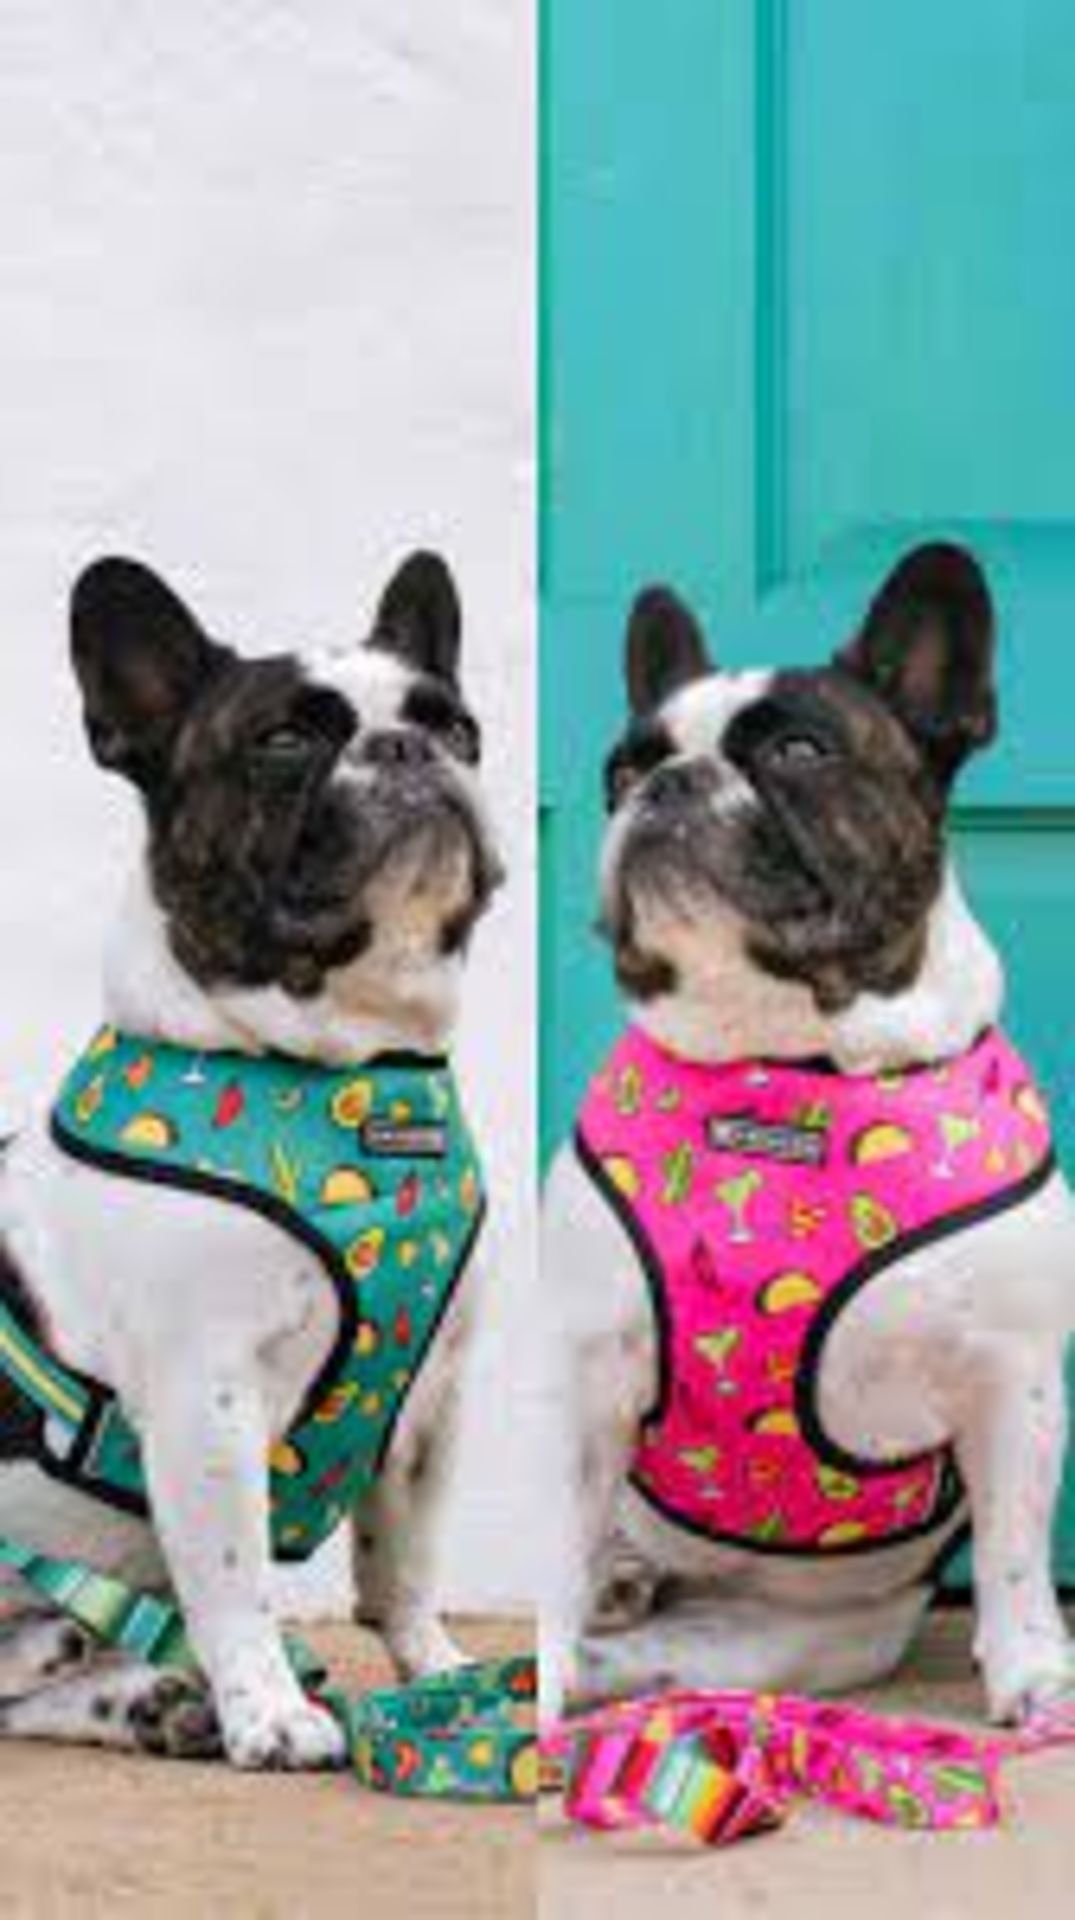 Trade Lot 50 X New .Packaged Frenchie The Bulldog Luxury Branded Dog Products. May include items - Image 50 of 50